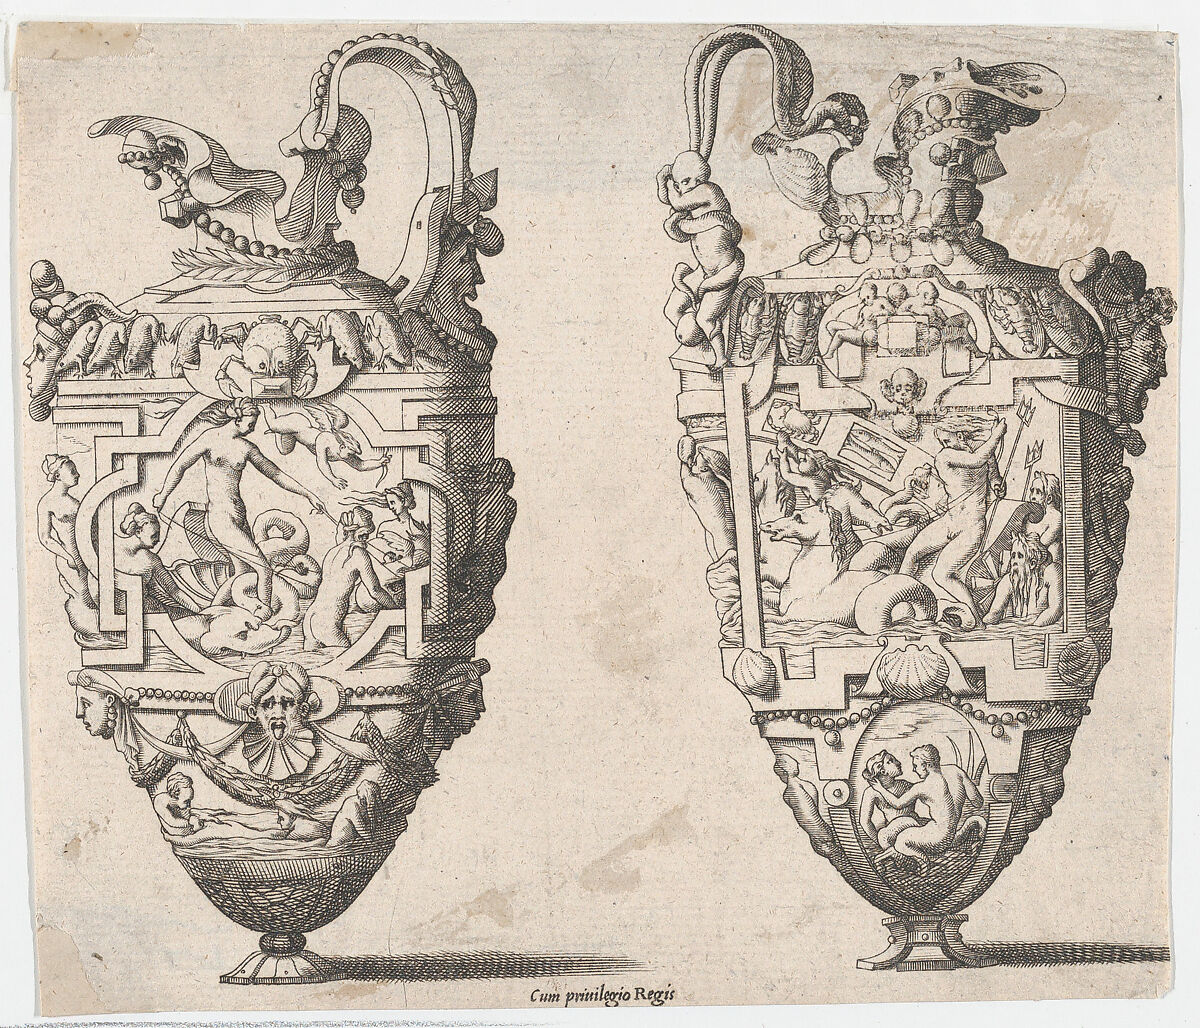 Two Vases, René Boyvin (French, Angers ca. 1525–1598 or 1625/6 Angers), Engraving 